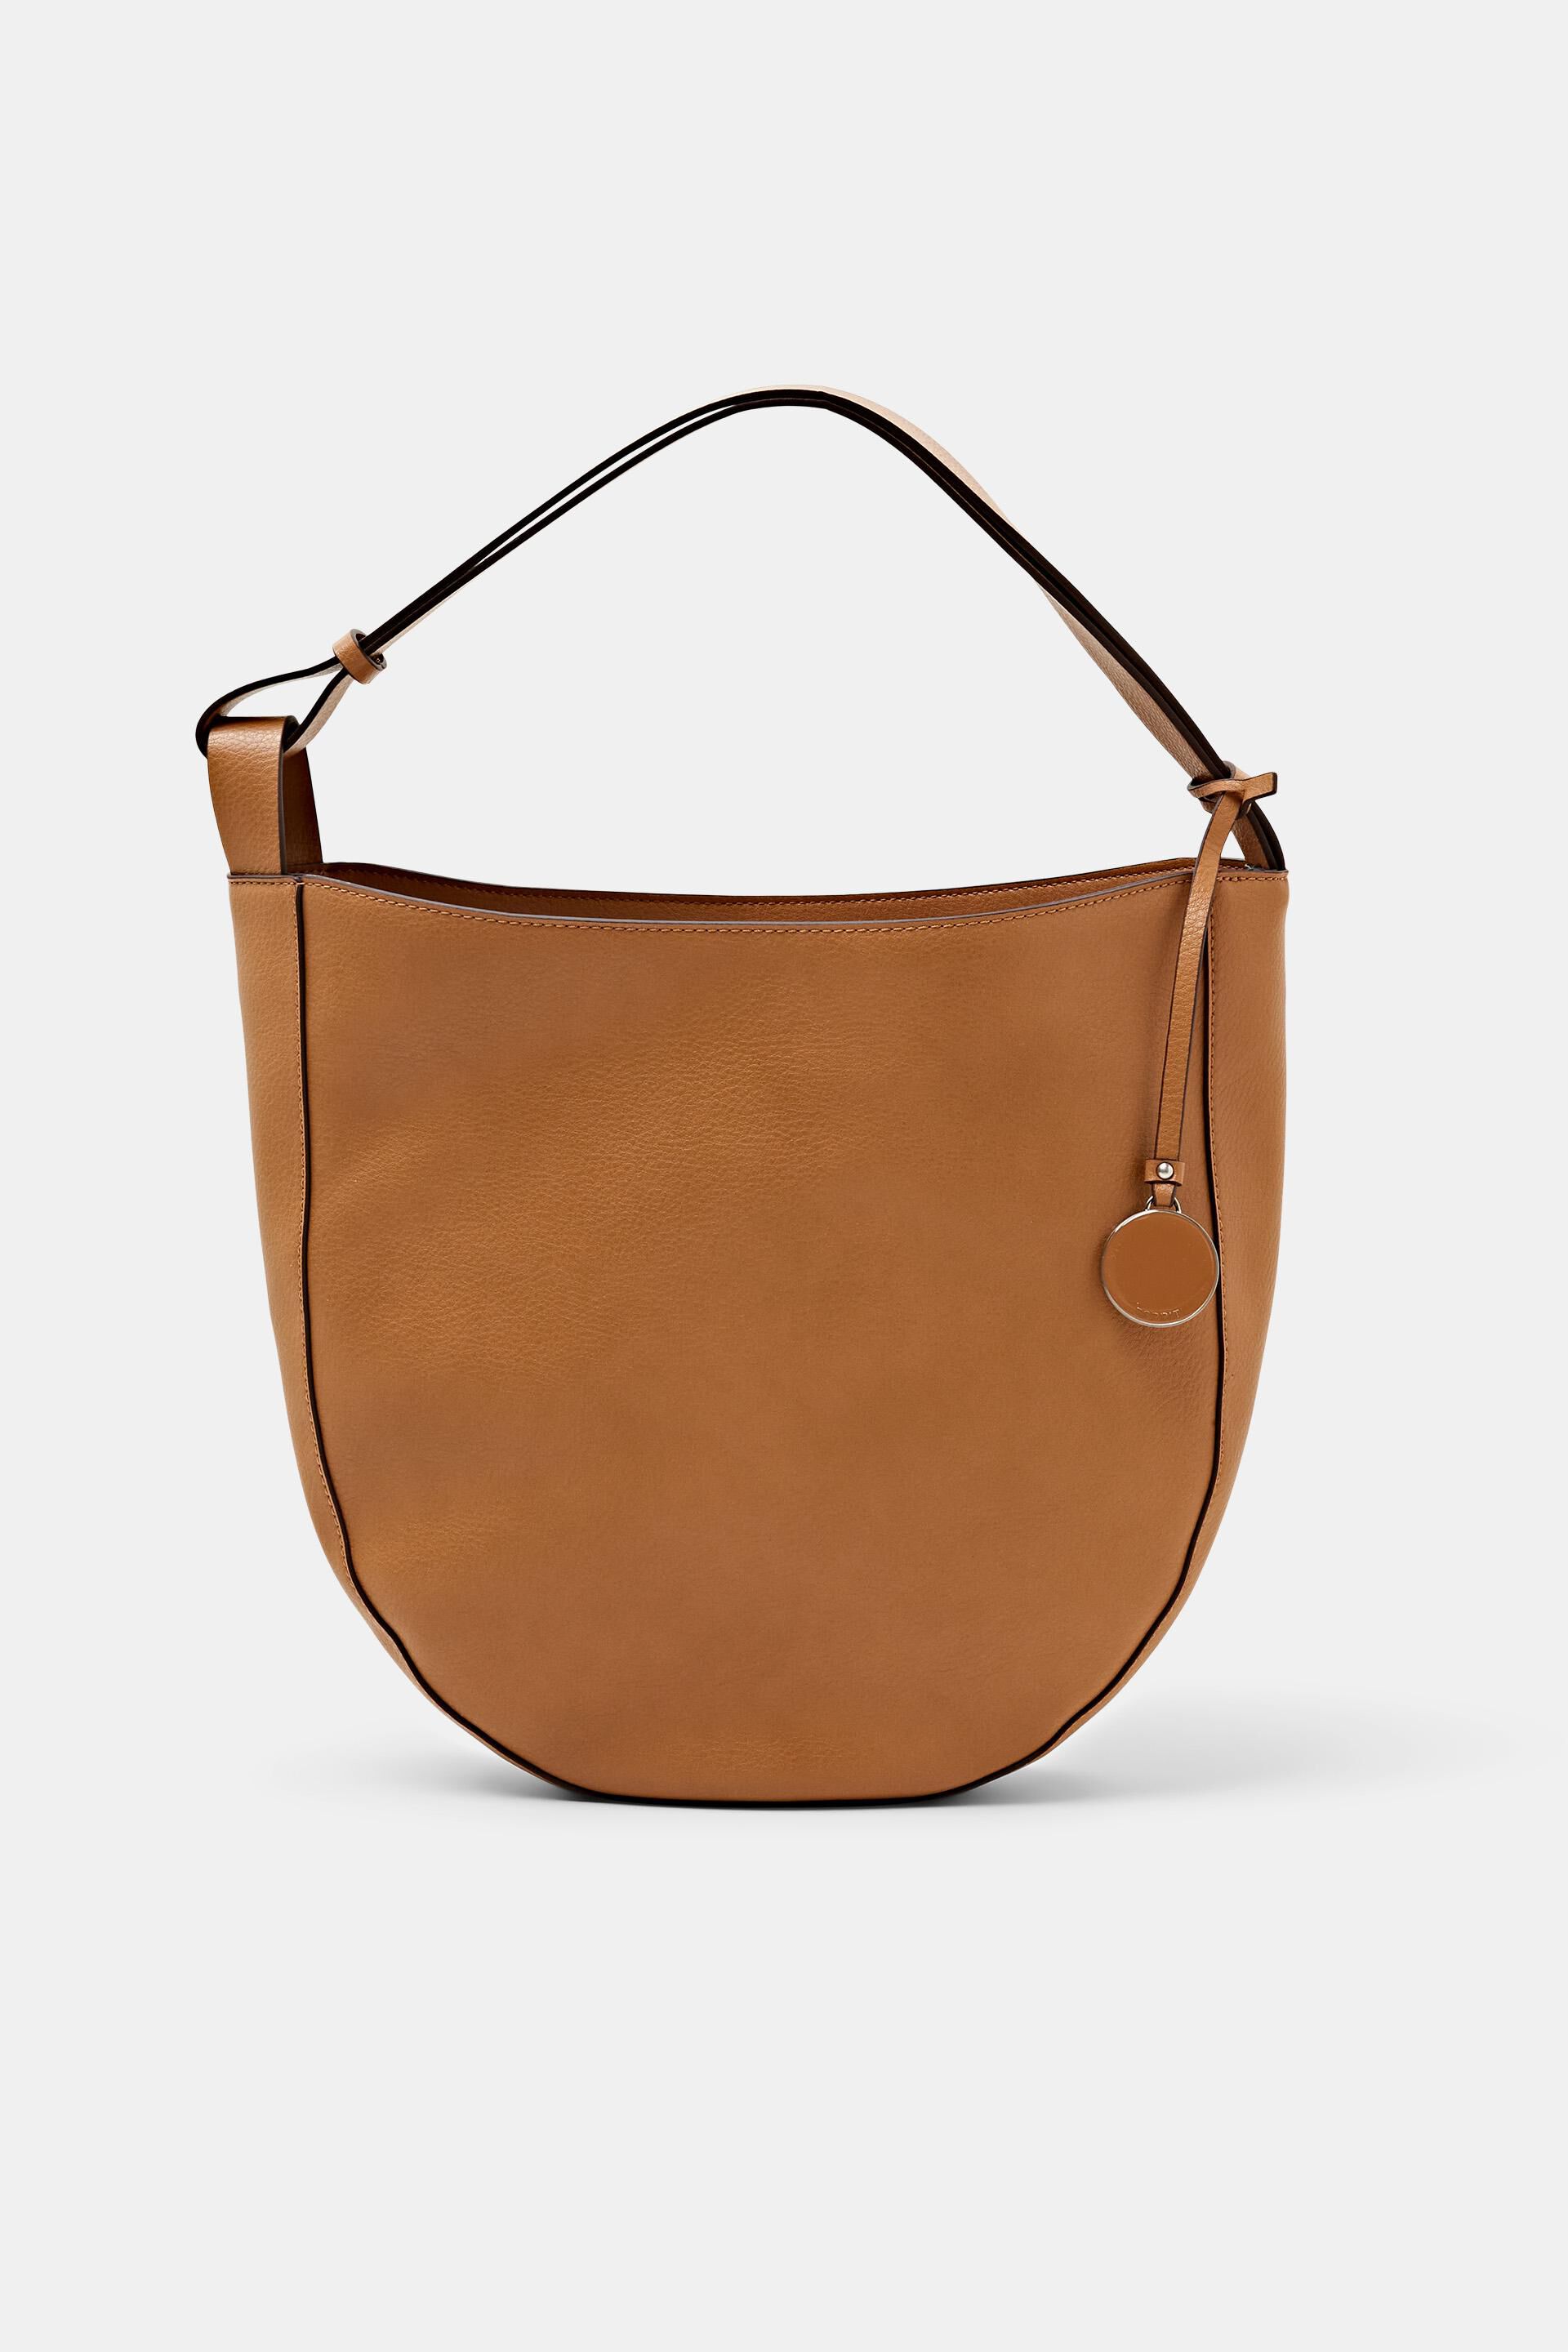 Esprit Online Store Recycled: faux leather hobo bag